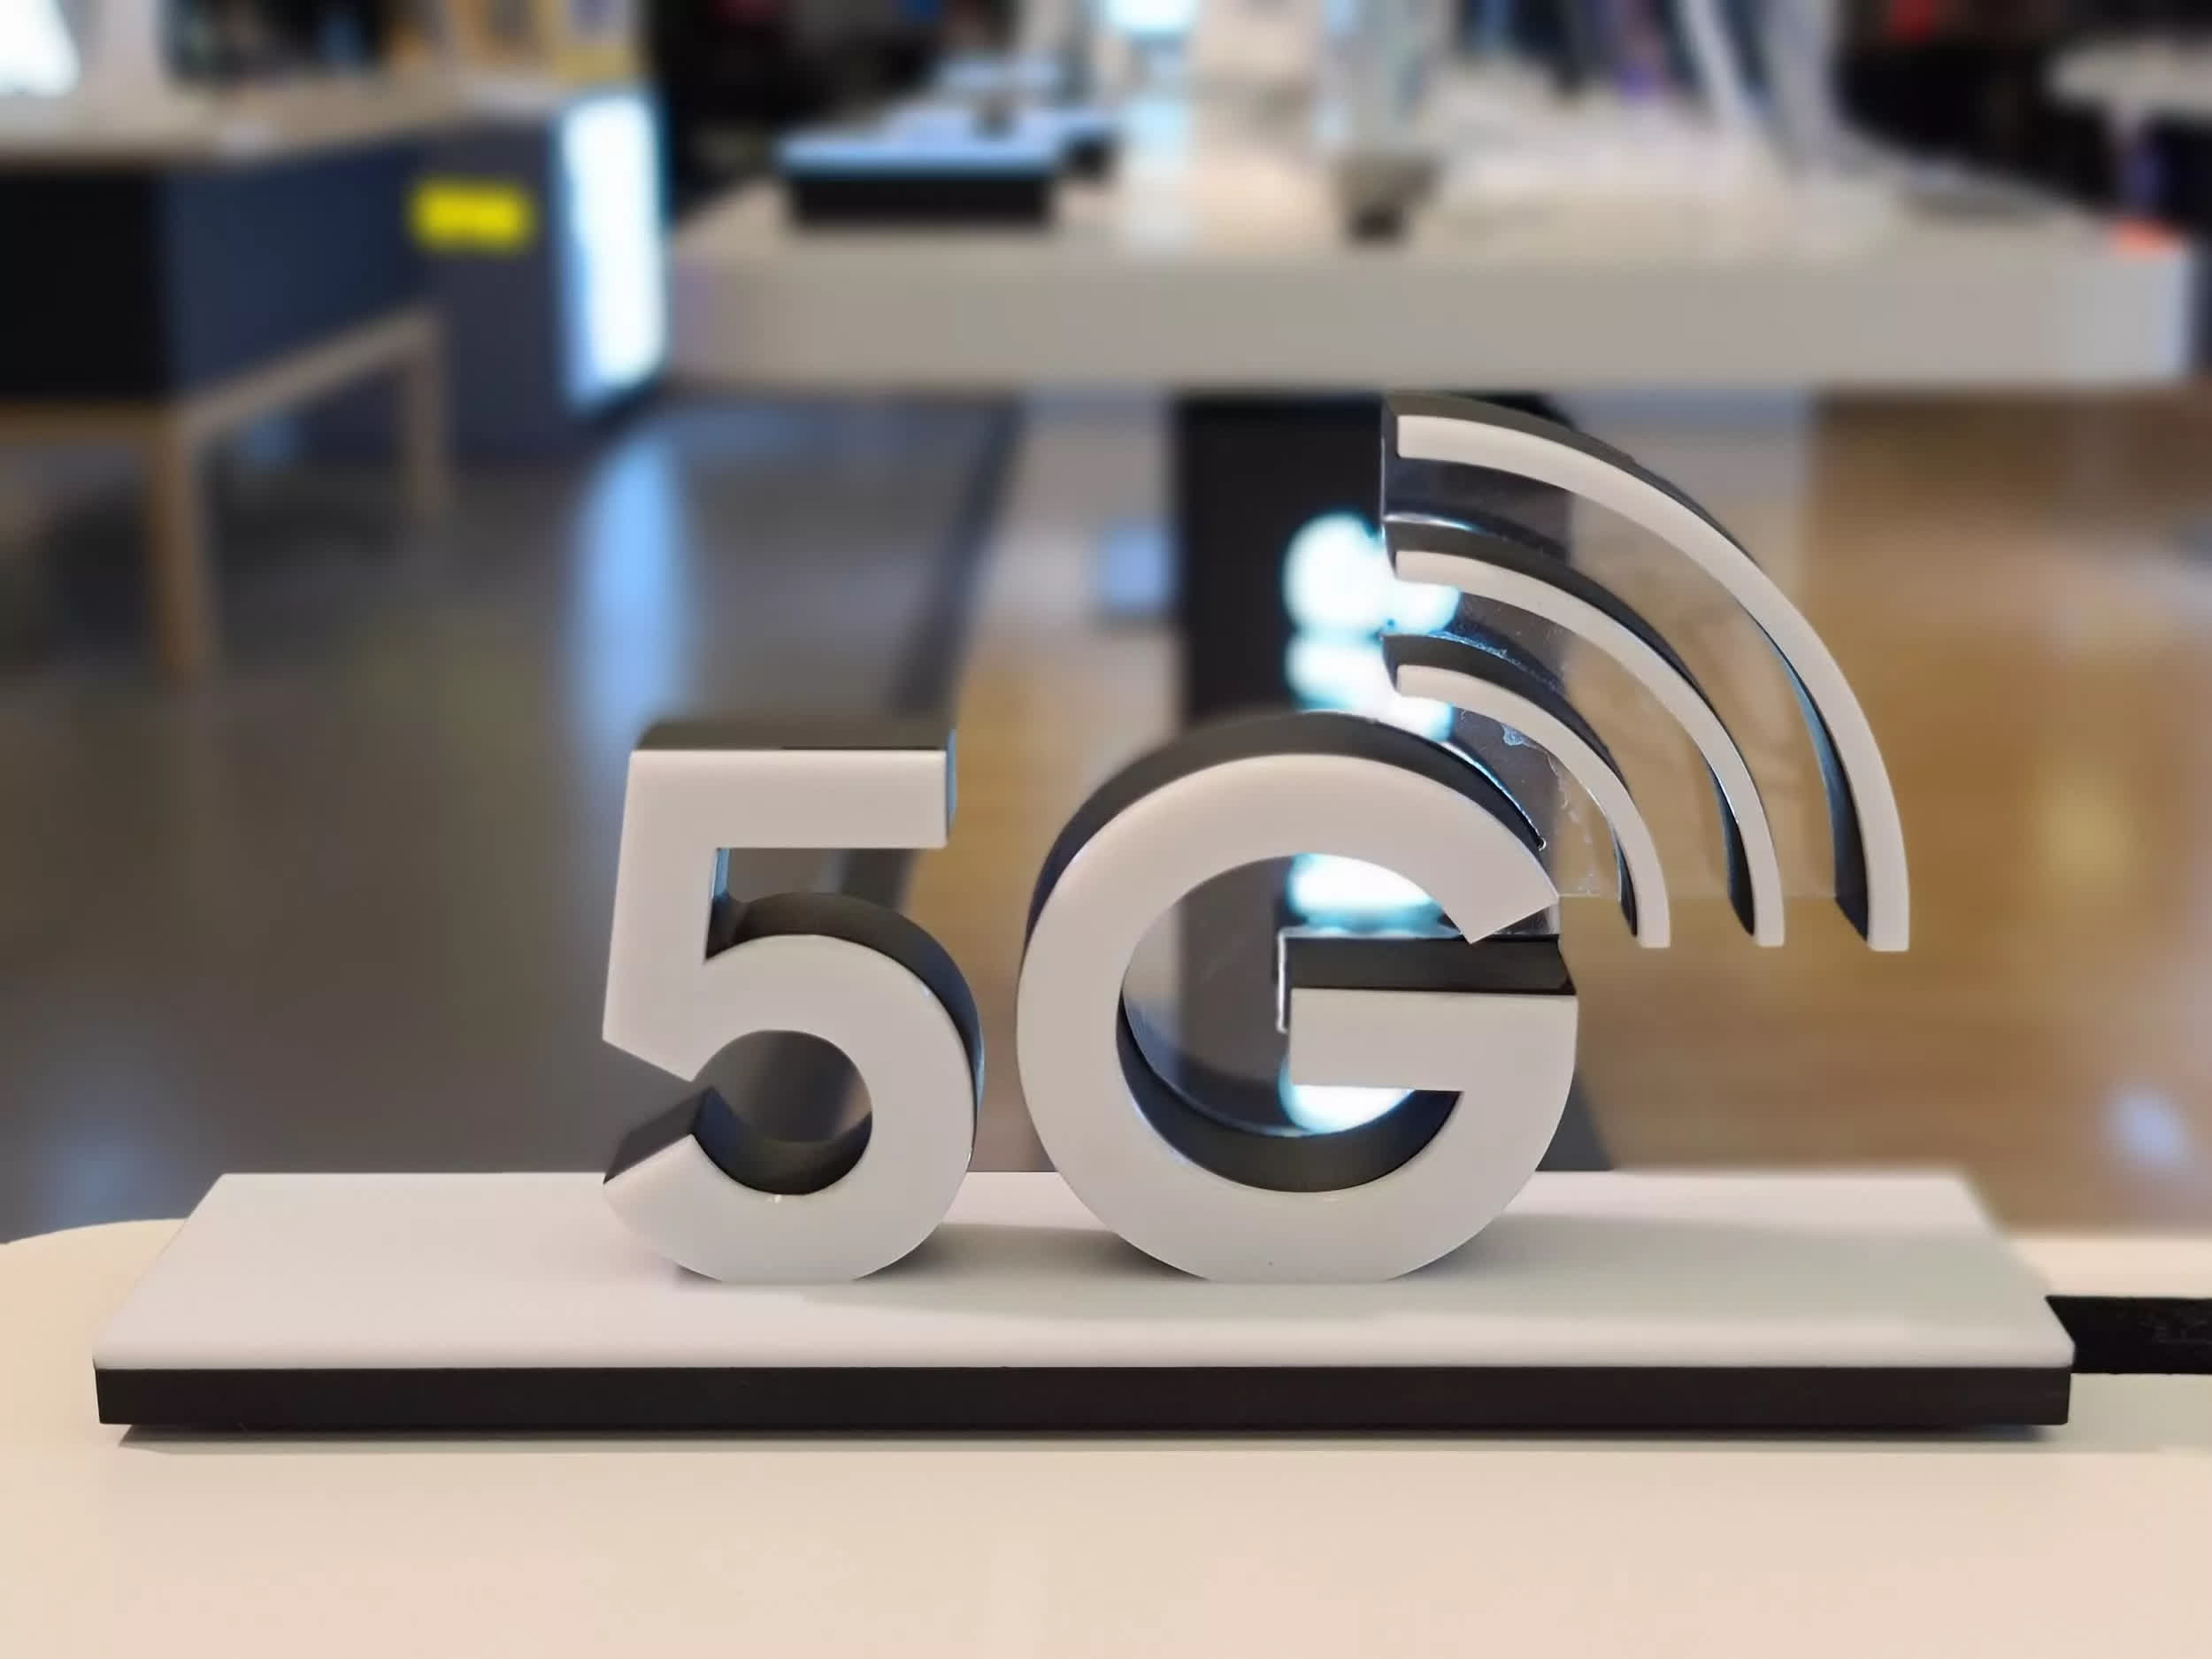 The 5G market in the U.S. just got much more interesting